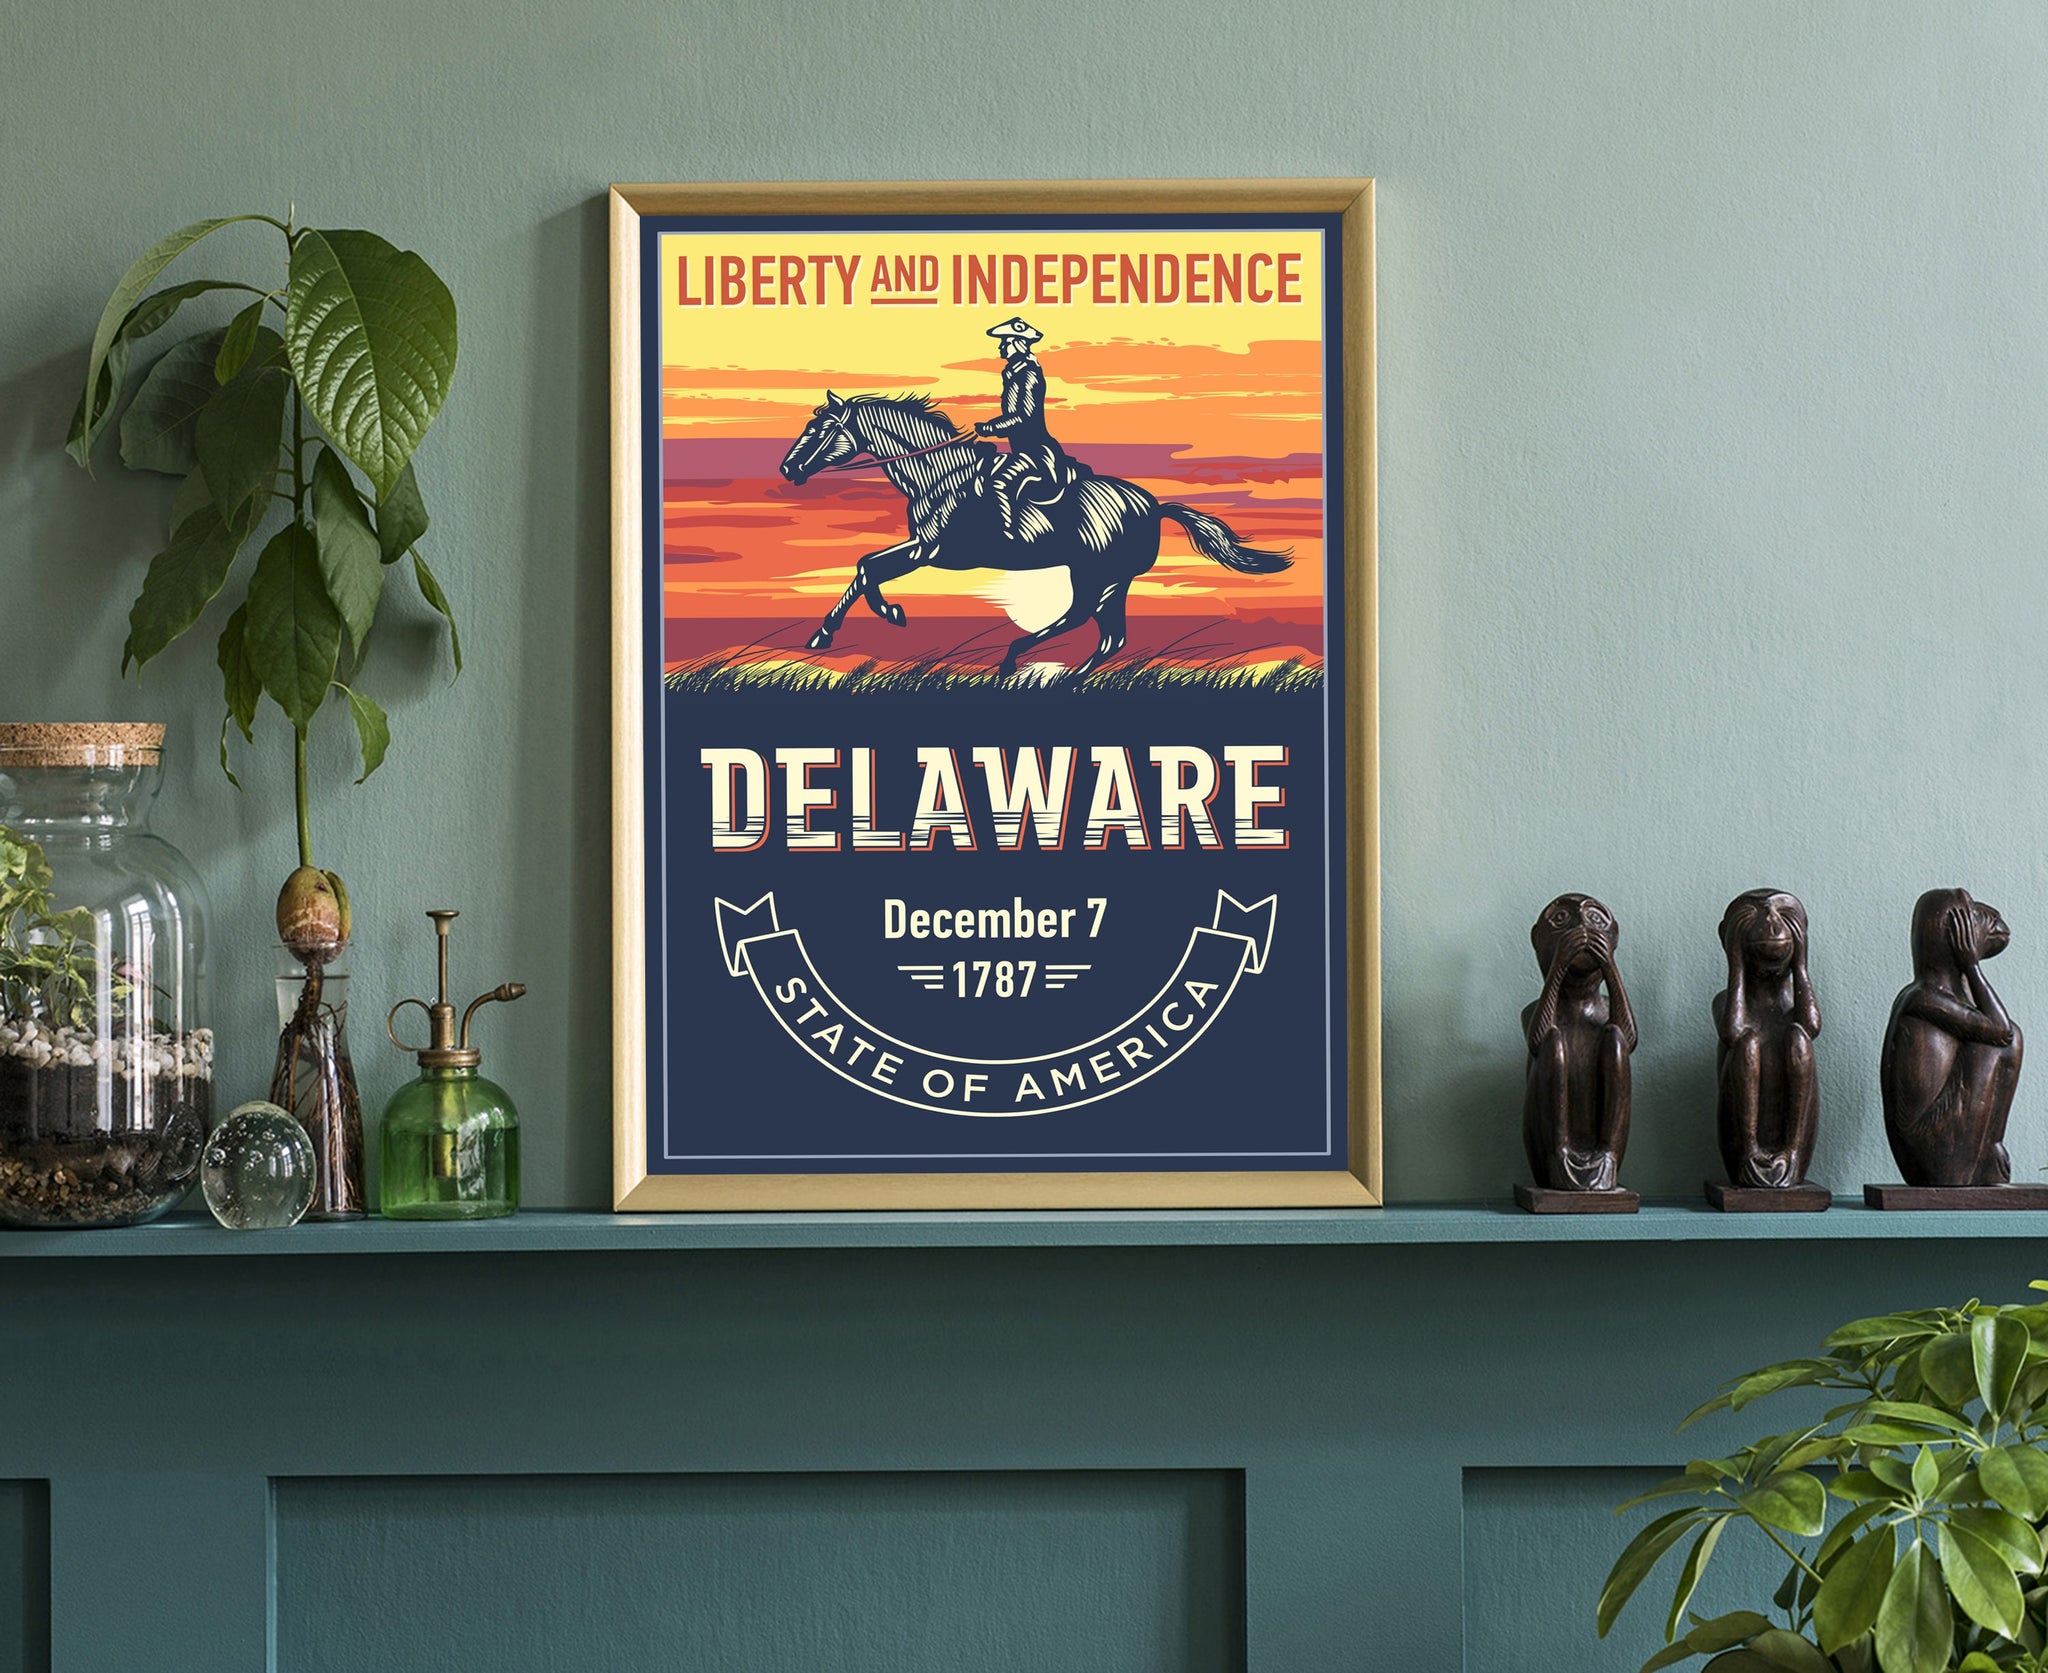 United States Delaware State Poster, Delaware Poster Print, Delaware State Emblem Poster, Retro Travel State Poster, Home Office Wall Art